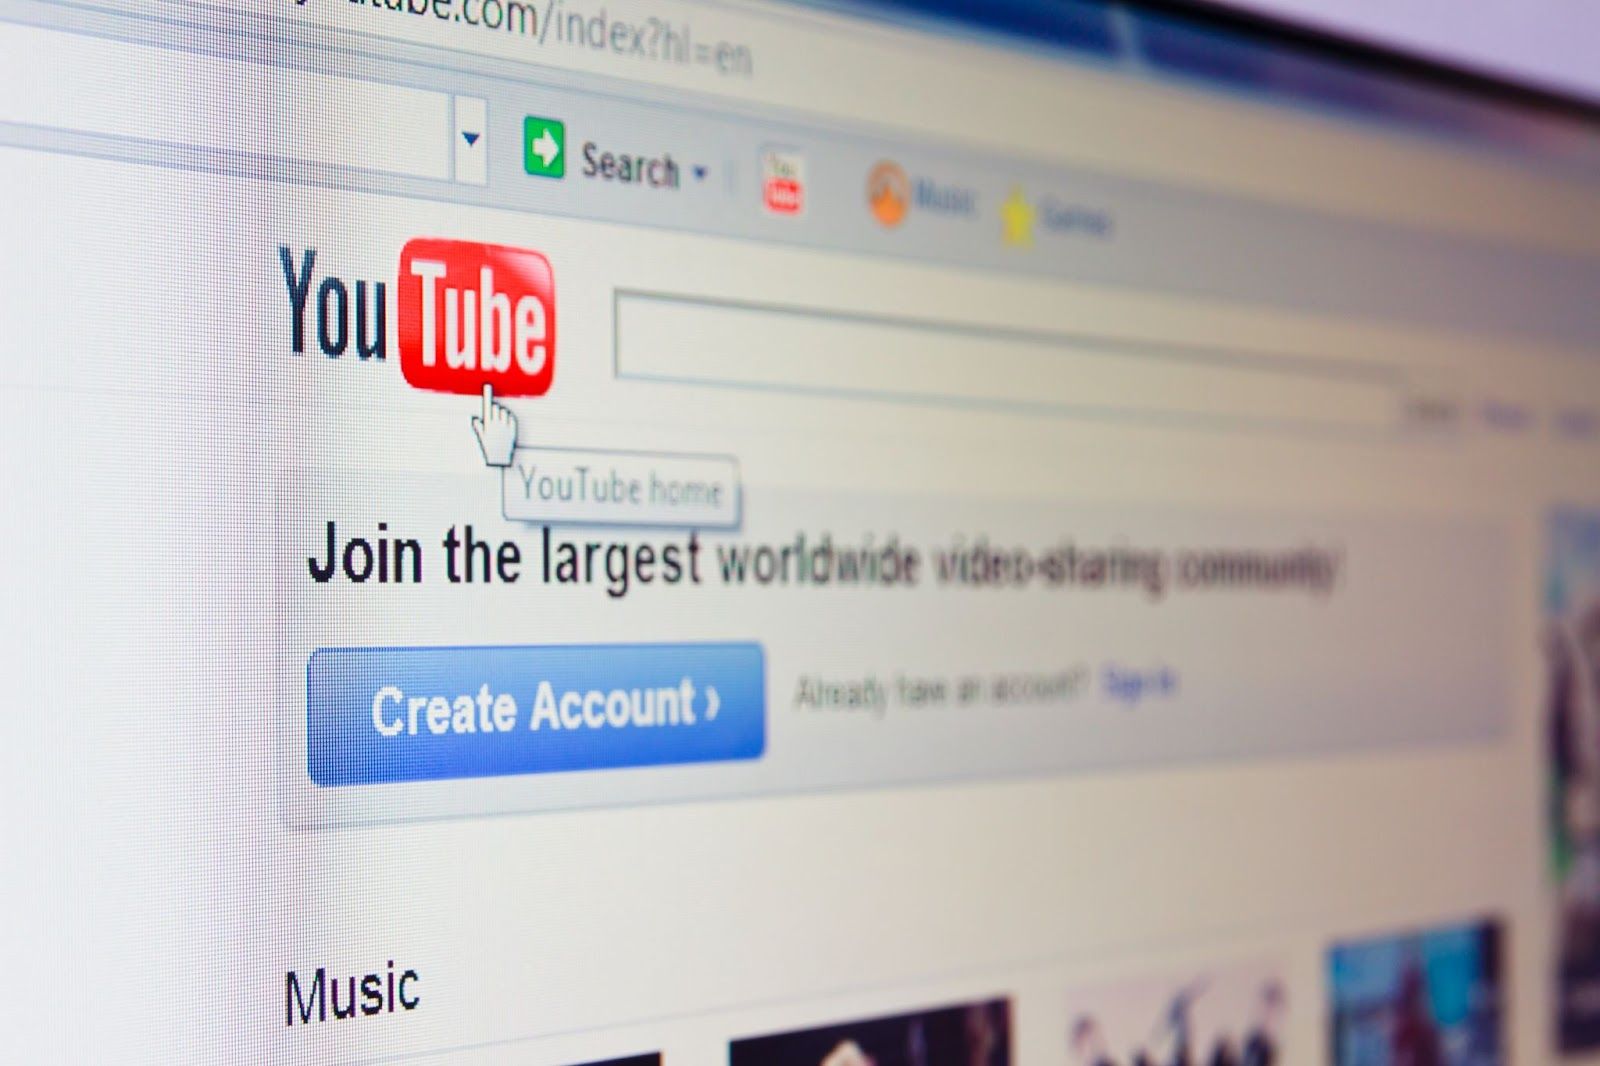 How to drive traffic to your website: Create content on YouTube